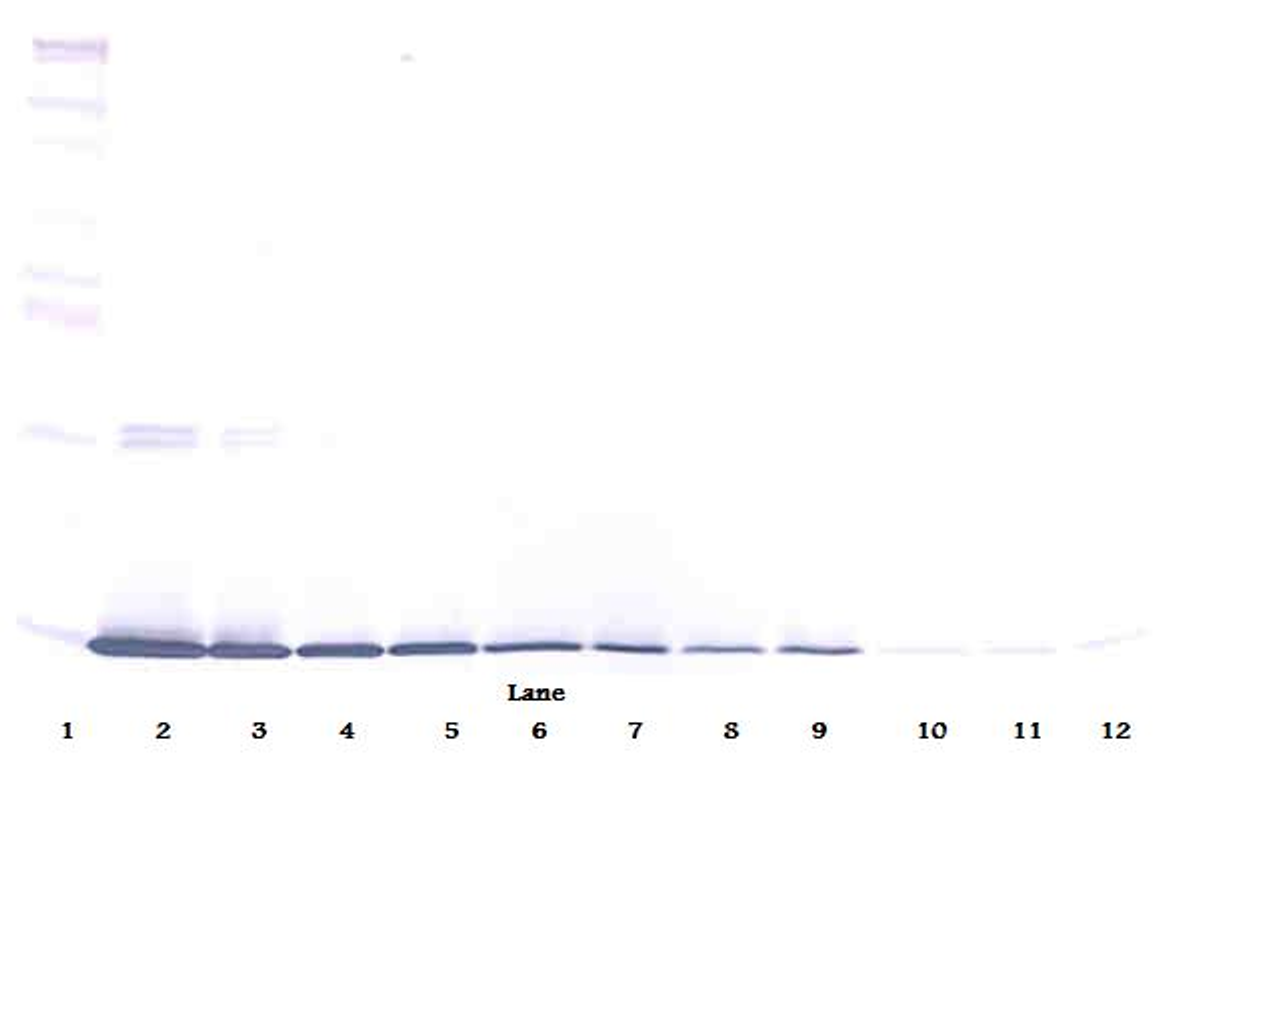 To detect Rat Leptin by Western Blot analysis this antibody can be used at a concentration of 0.1 - 0.2 ug/ml. Used in conjunction with compatible secondary reagents the detection limit for recombinant Rat Leptin is 1.5 - 3.0 ng/lane, under either reducing or non-reducing conditions.